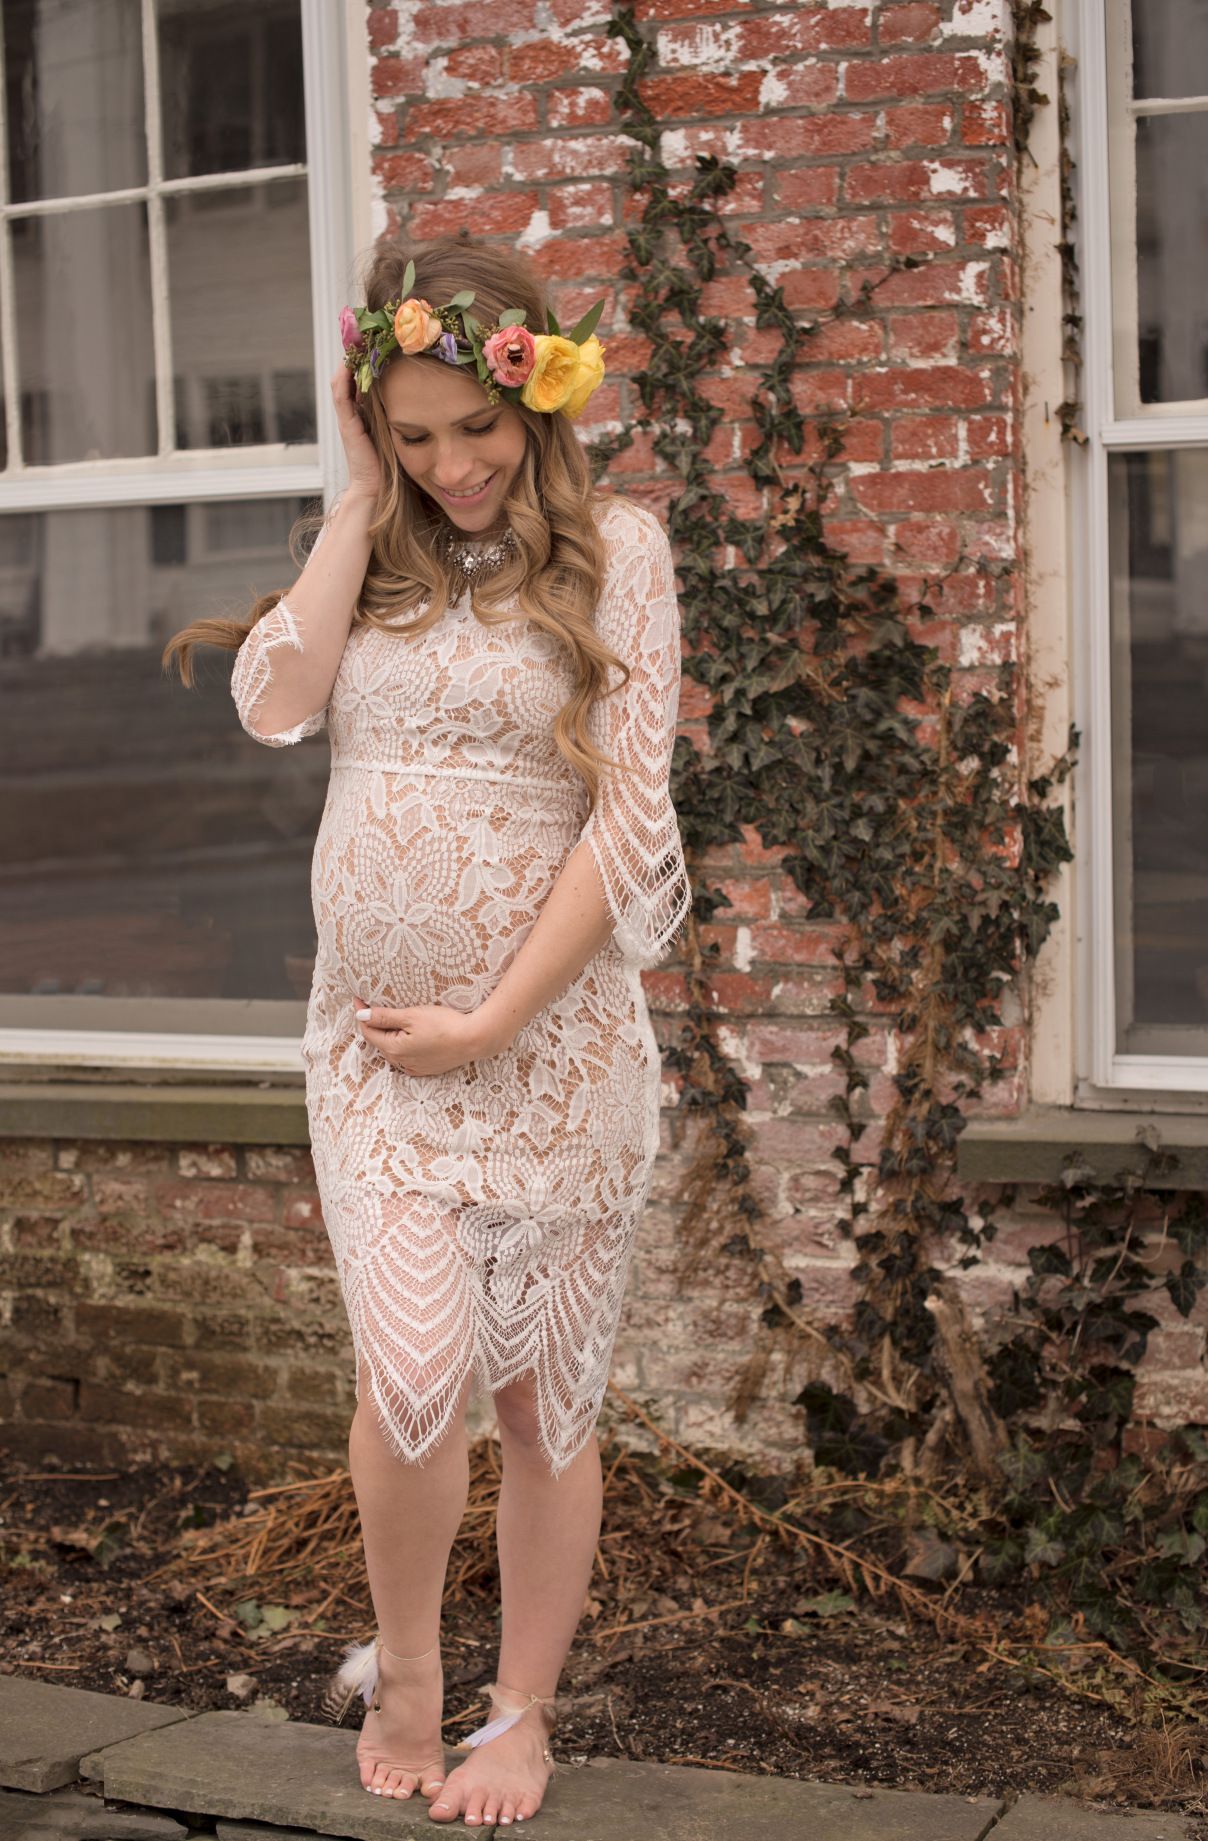 Full Size of Baby Shower:what Should I Wear To My Baby Shower Cute Baby Shower Outfits For Mom Stylish Maternity Dresses For Baby Shower Maternity Clothes Target Baby Shower Dresses Cute Inexpensive Maternity Clothes Maternity Evening Gowns Plus Size Maternity Dresses For Baby Shower